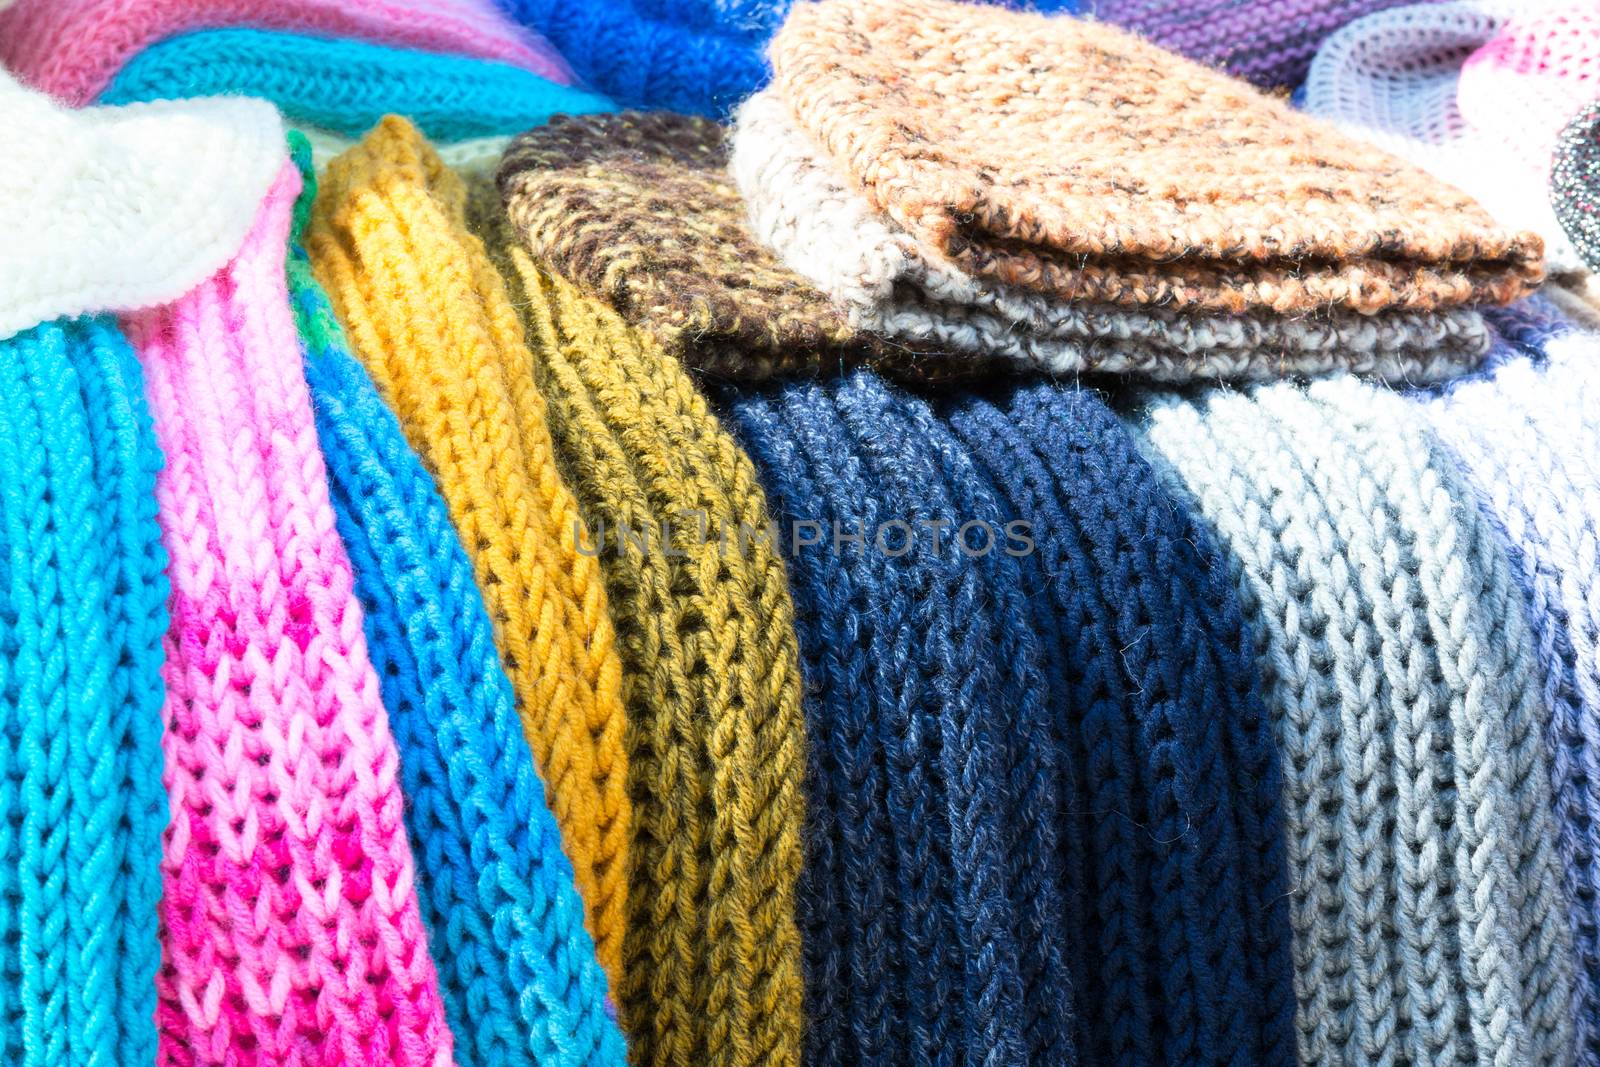 Knitted scarves and hats